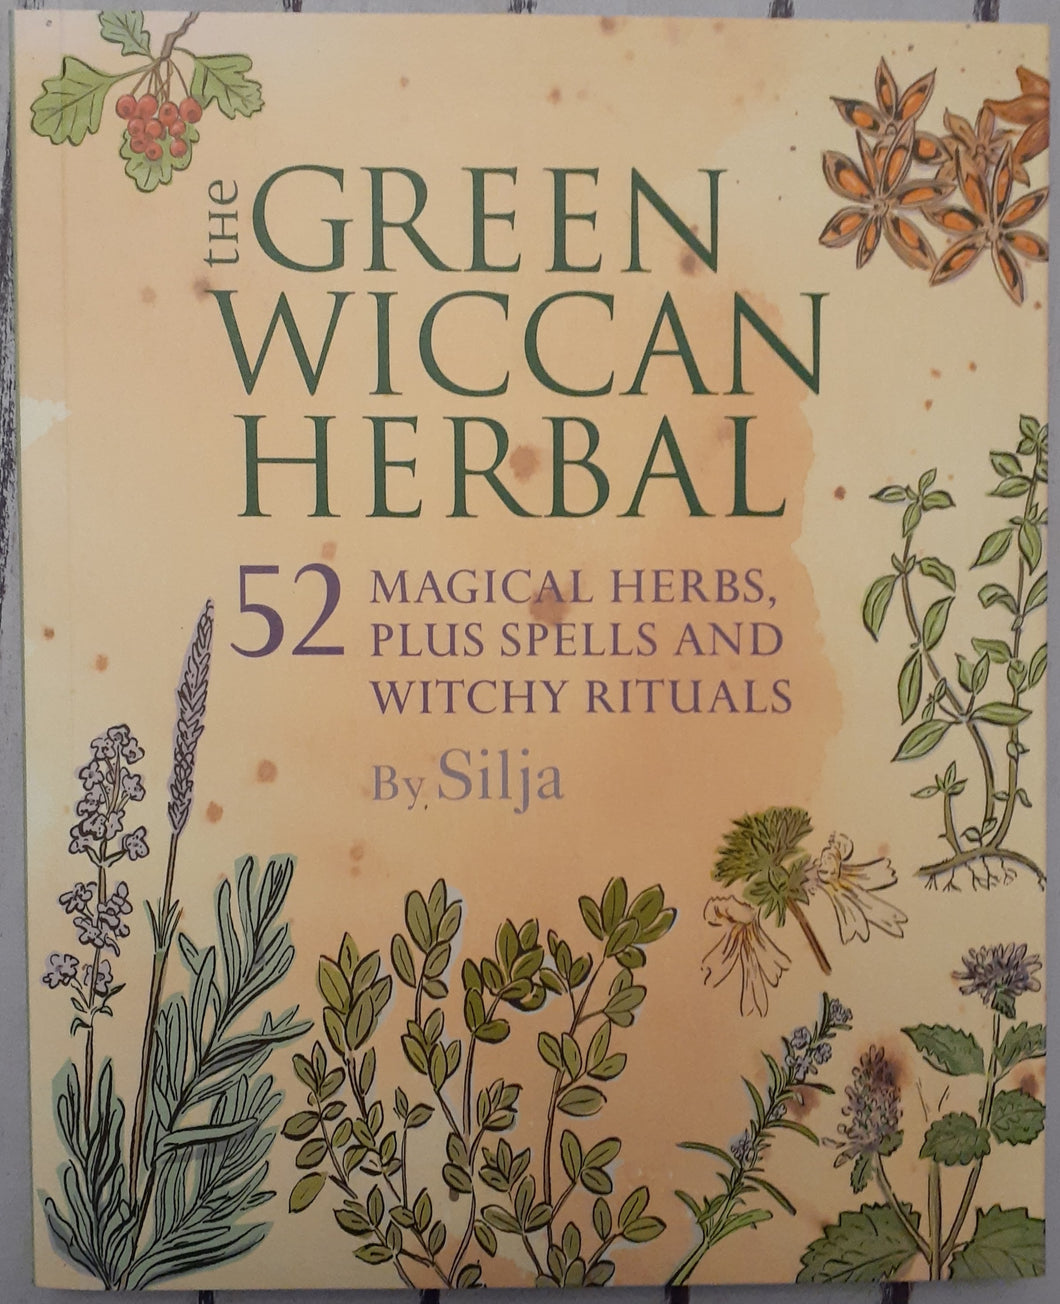 The Green Wiccan Herbal: 52 Magical Herbs, Spells & Witchy Rituals